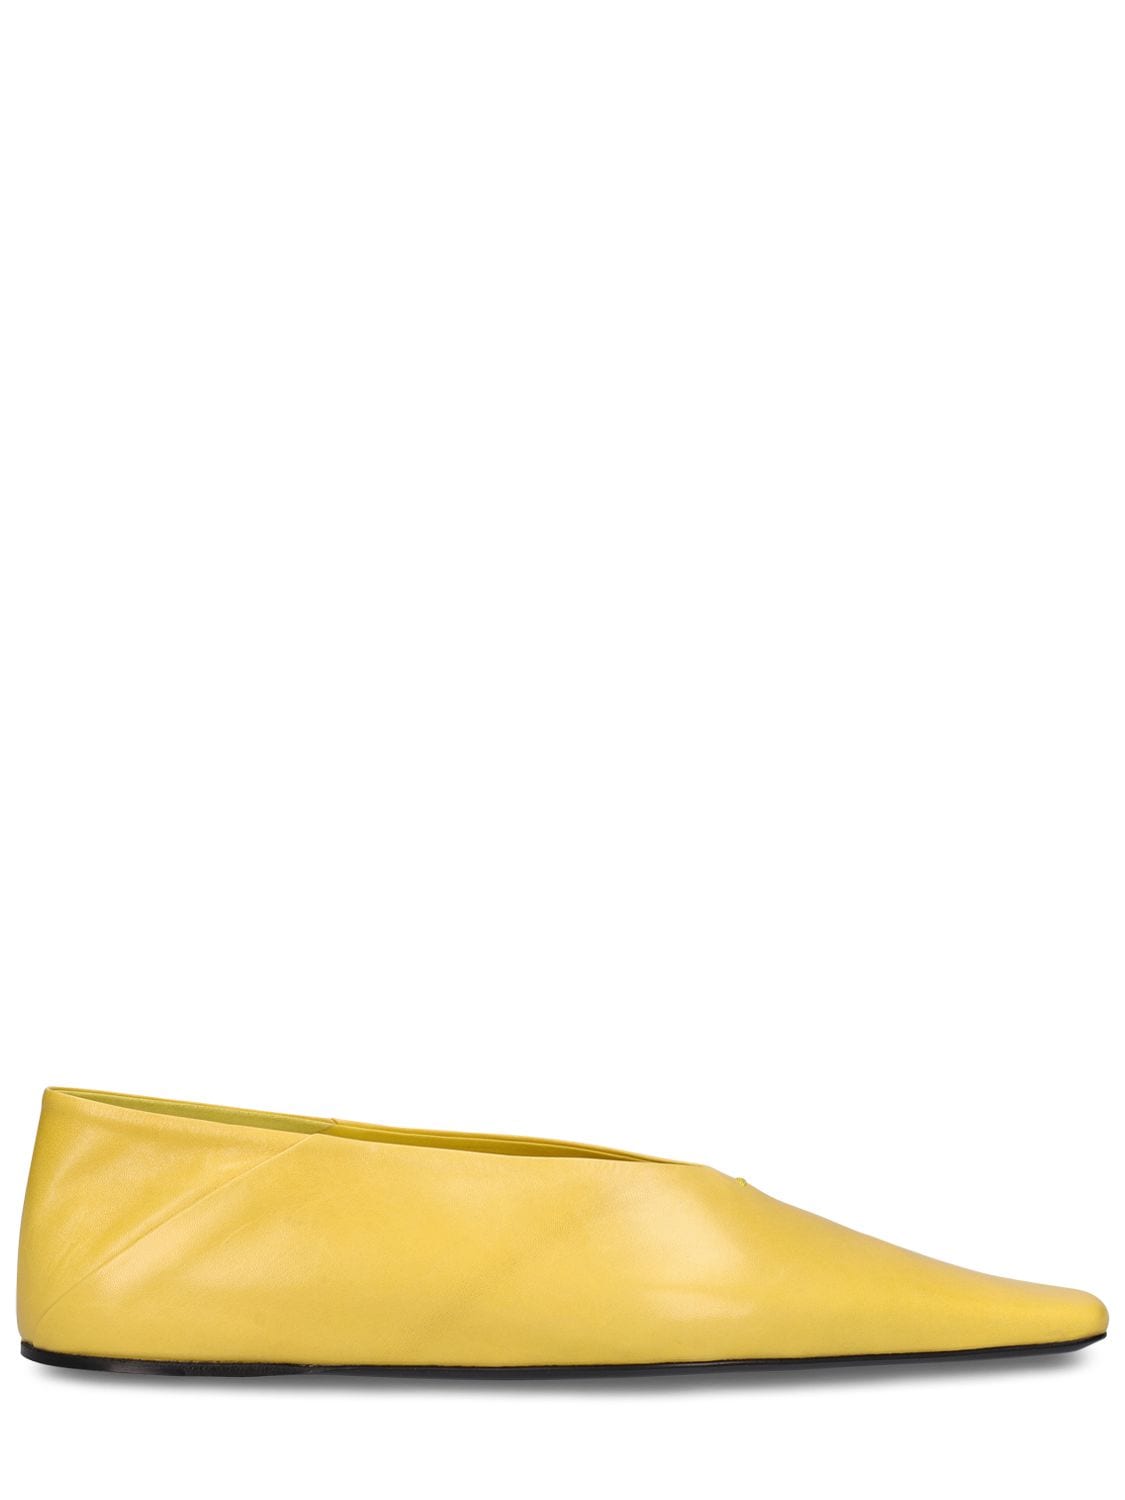 Jil Sander 10mm Leather Flat Shoes In Yellow